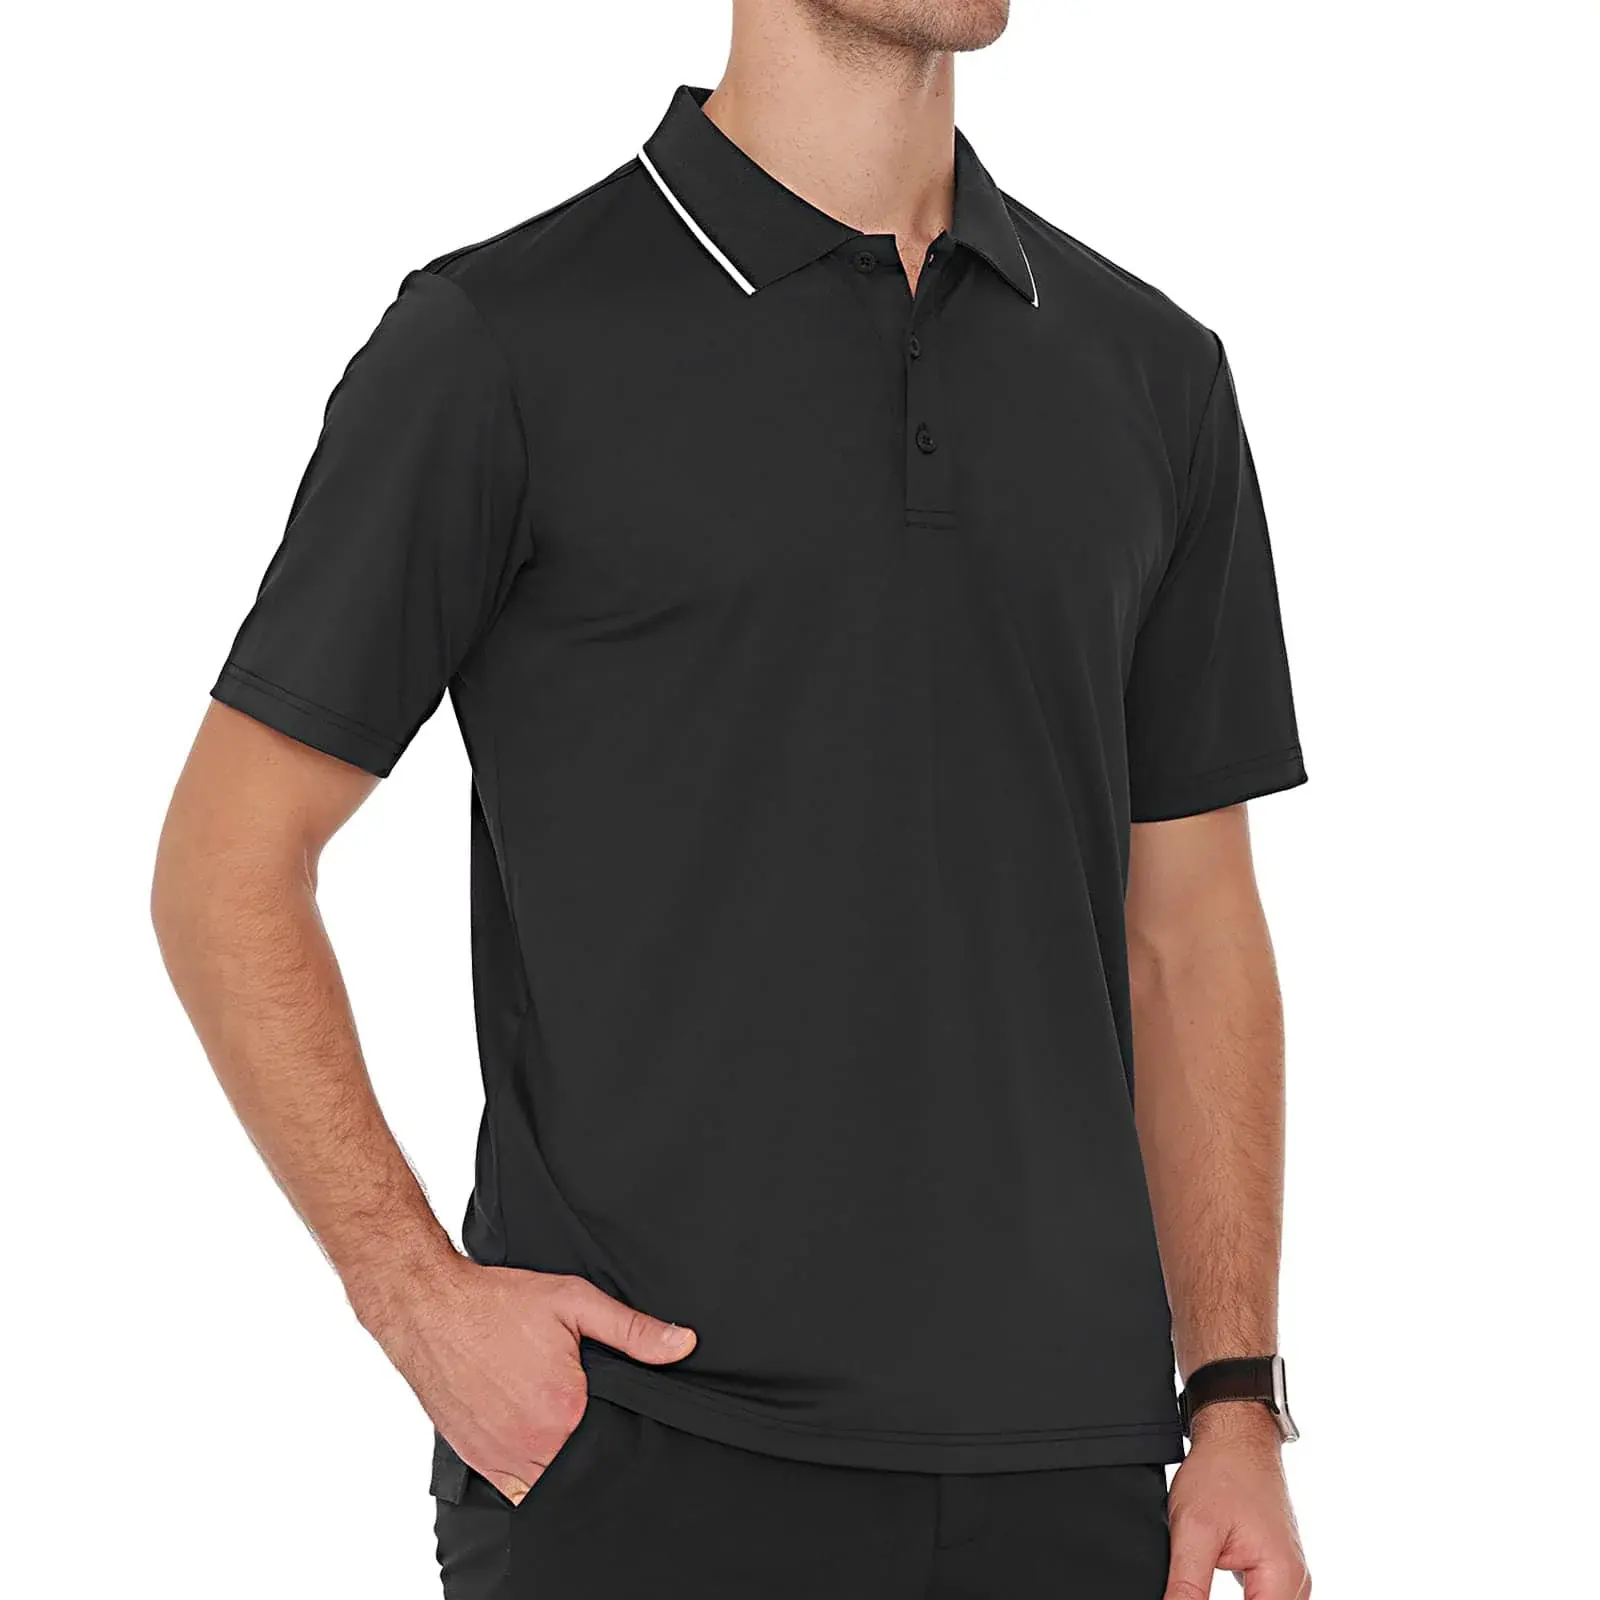 Men's Polo Shirts Quick-Dry Golf Shirt Dual Tipped Collar Moisture-wicking T-shirt For Men Breathable Short Sleeve Wear